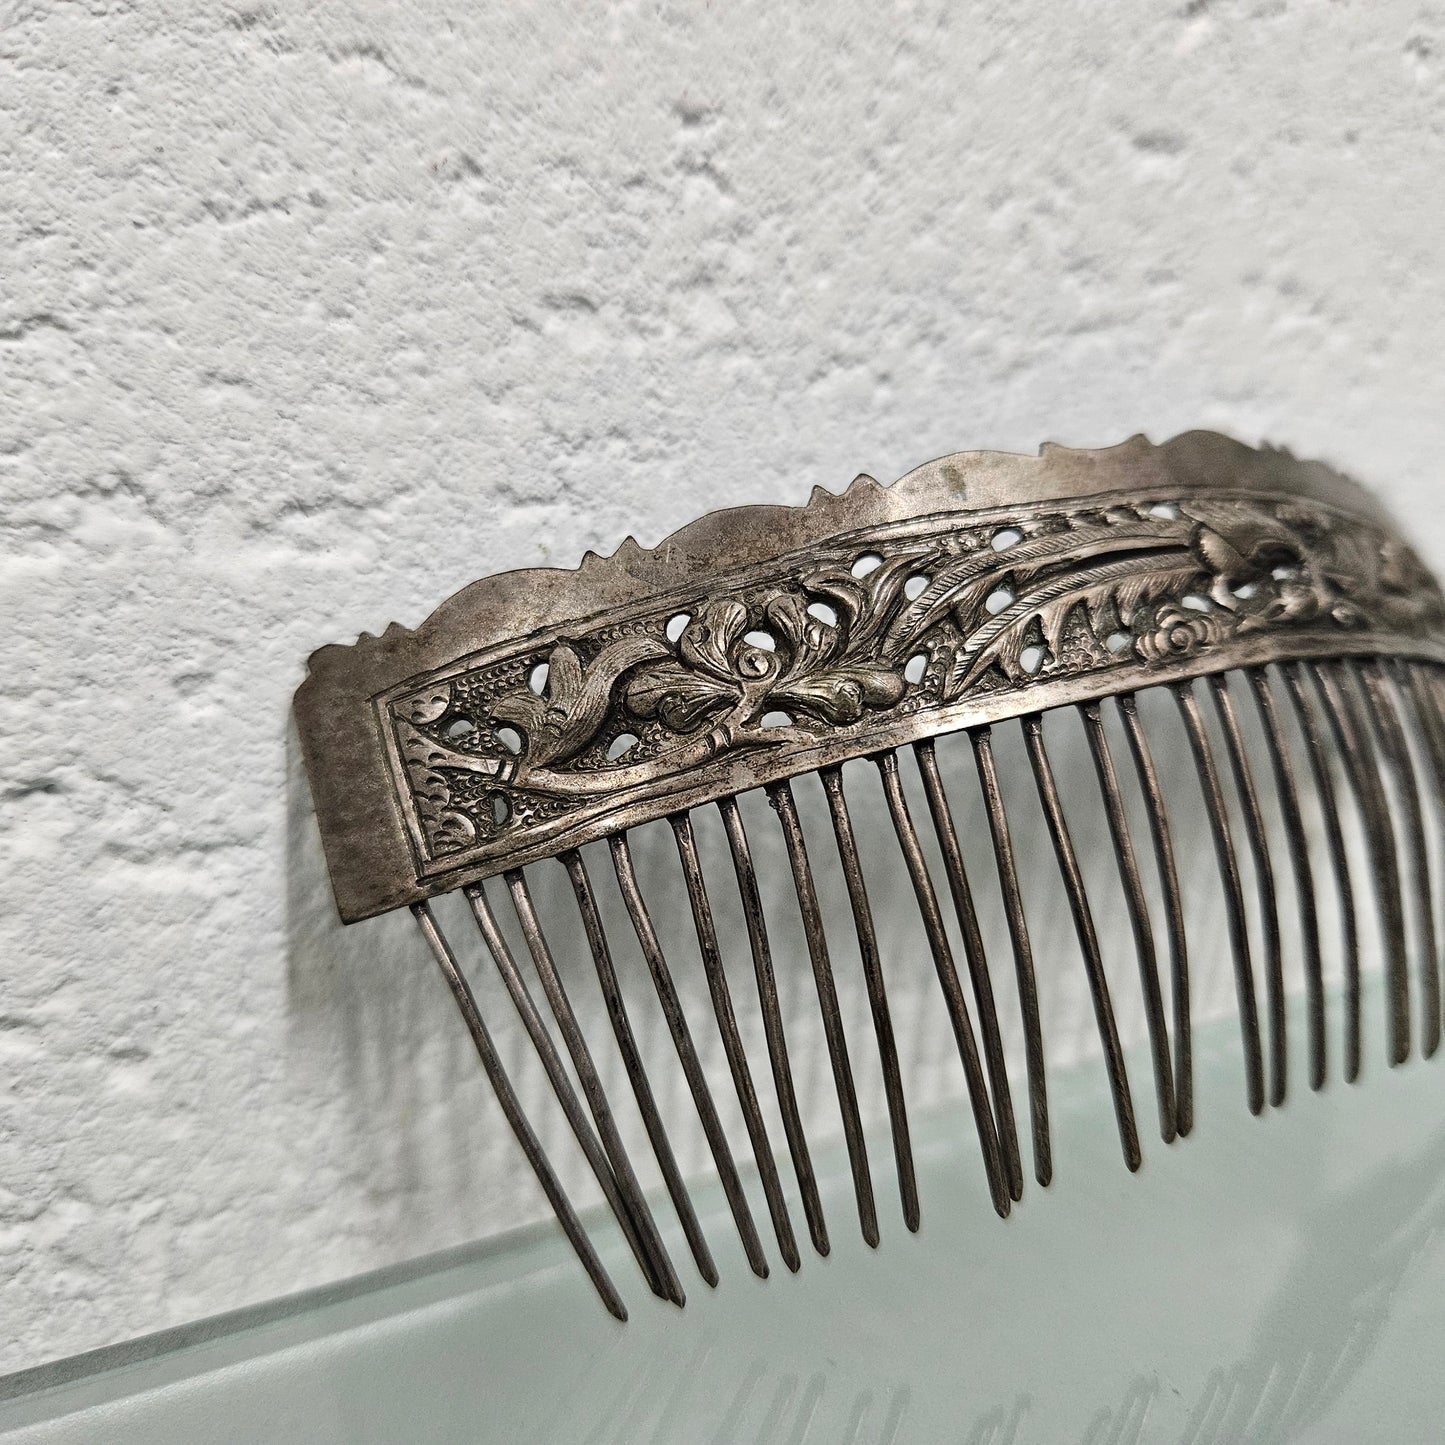 Antique Chinese Silver Hair Comb.  Please see photos as they form part of the description.